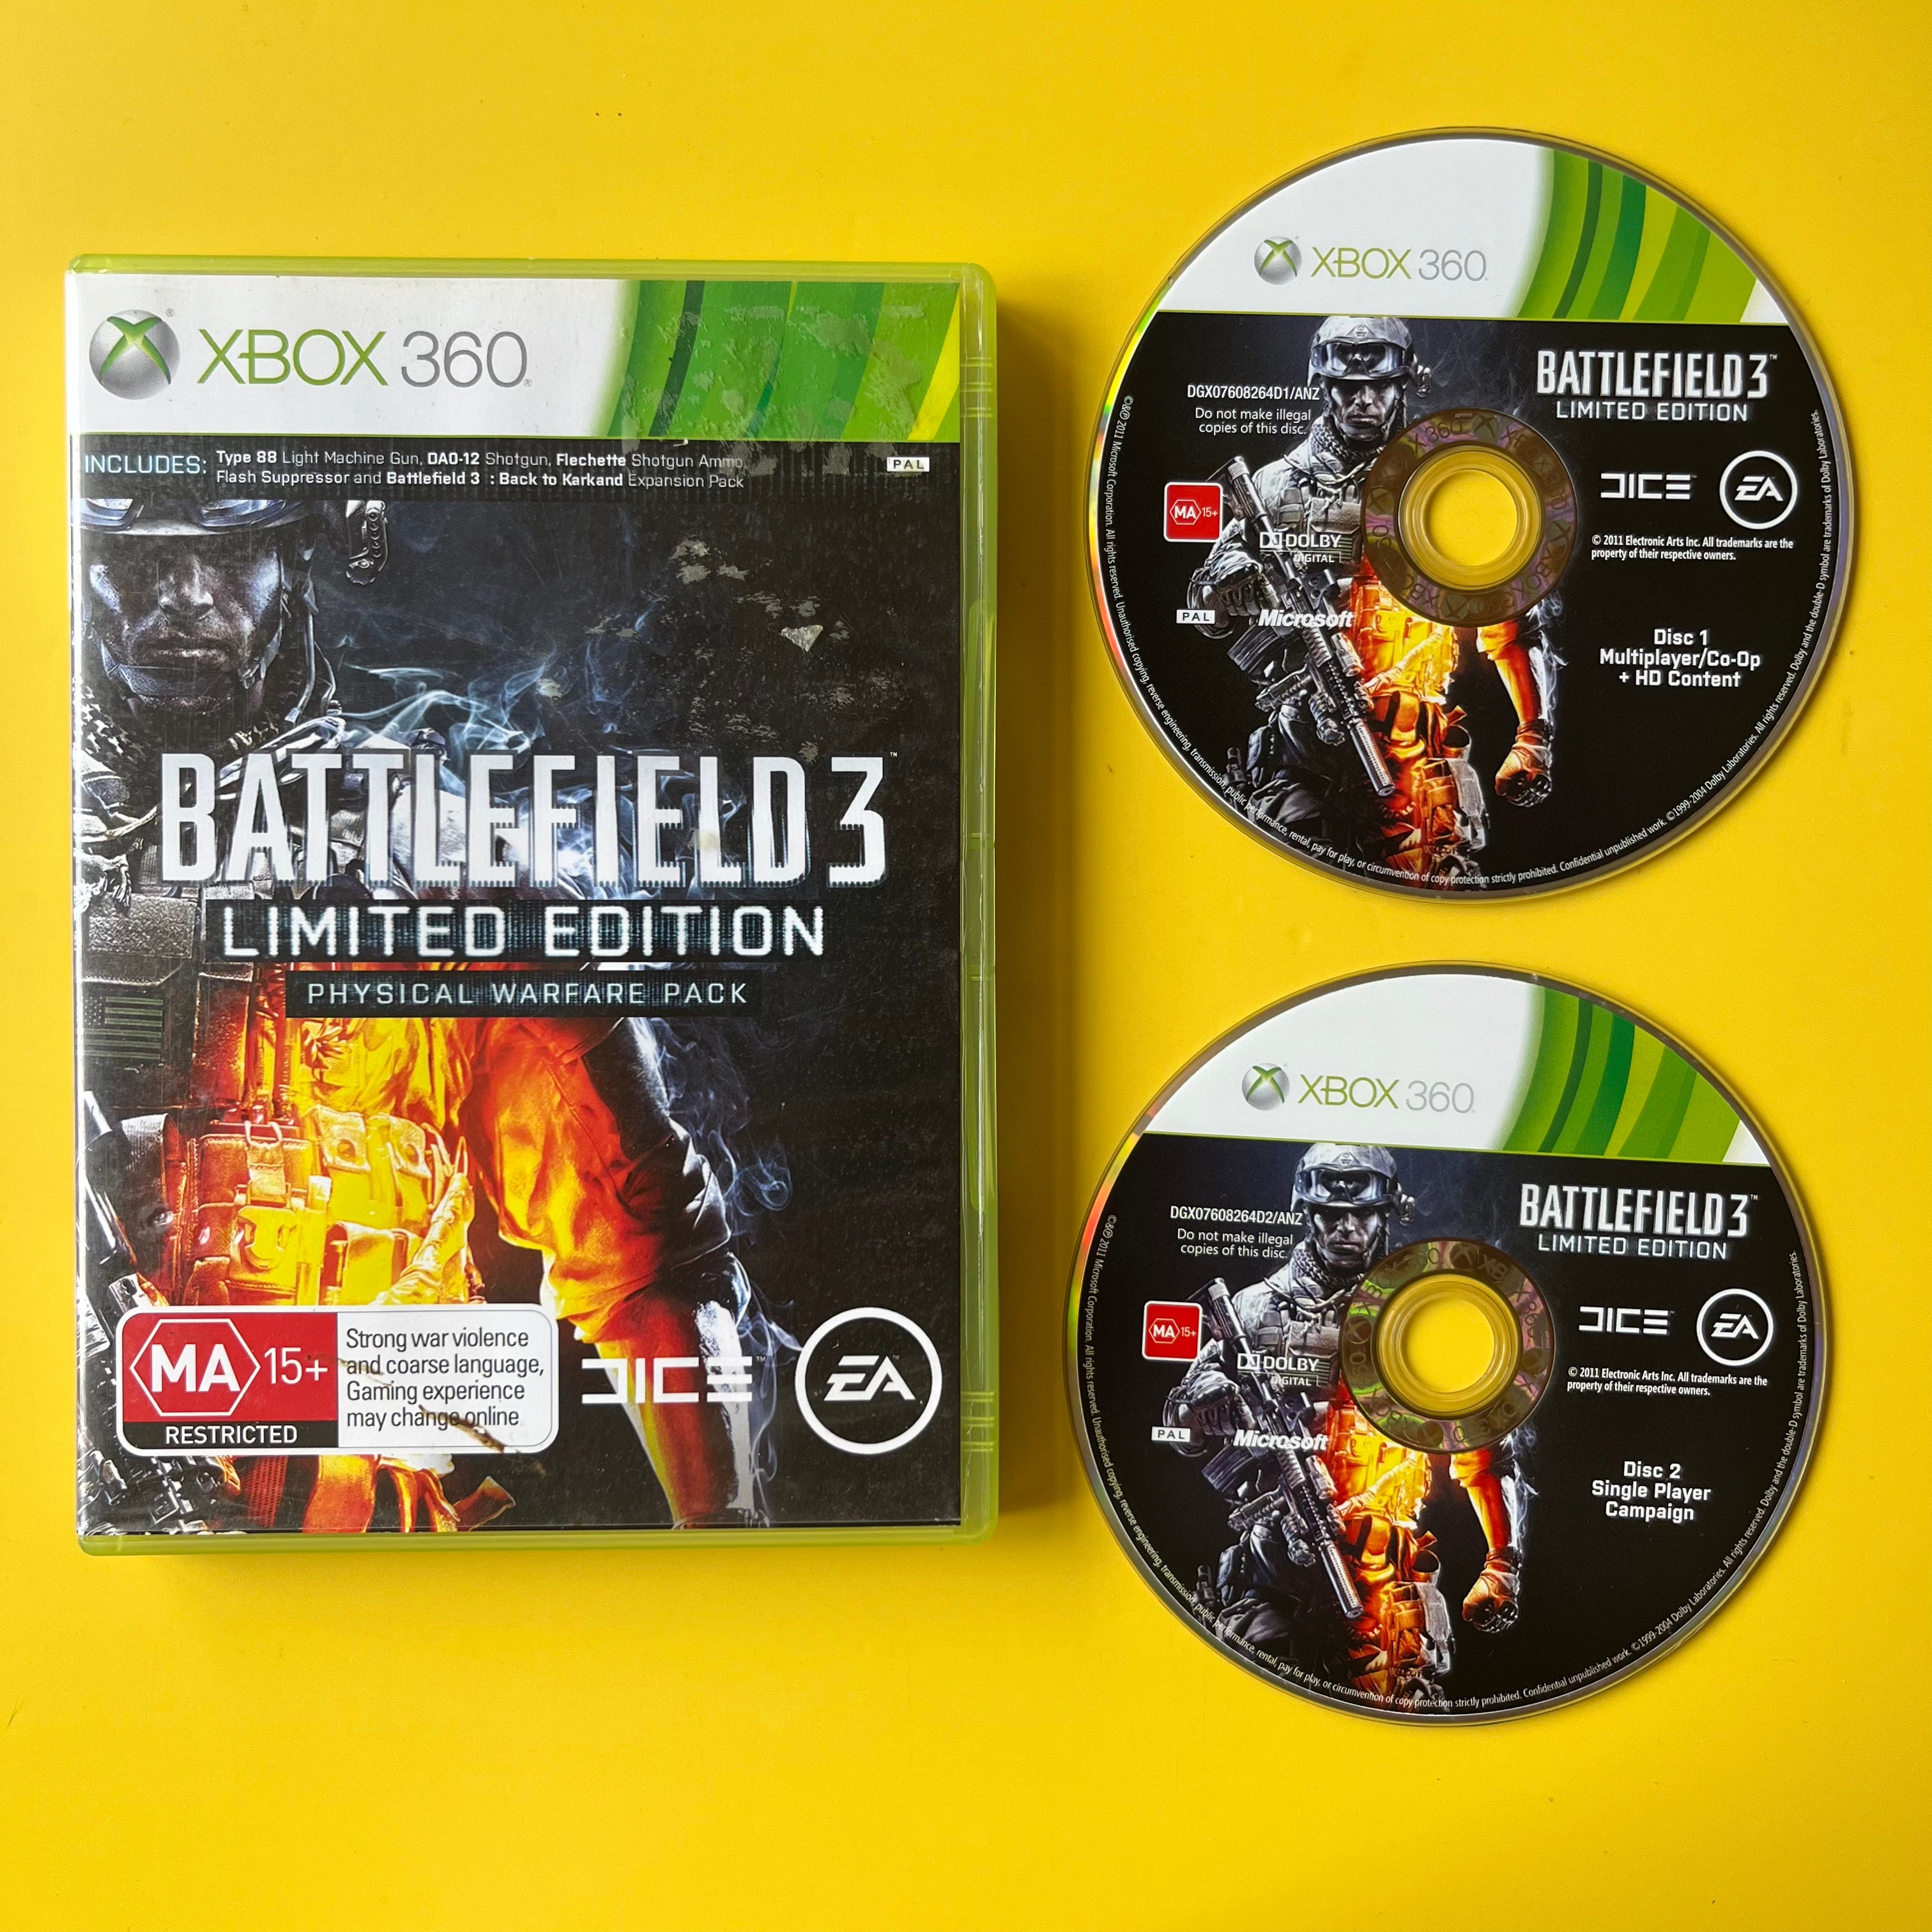 Xbox 360 - Battlefield 3 - Limited Edition - Physical Warfare Pack